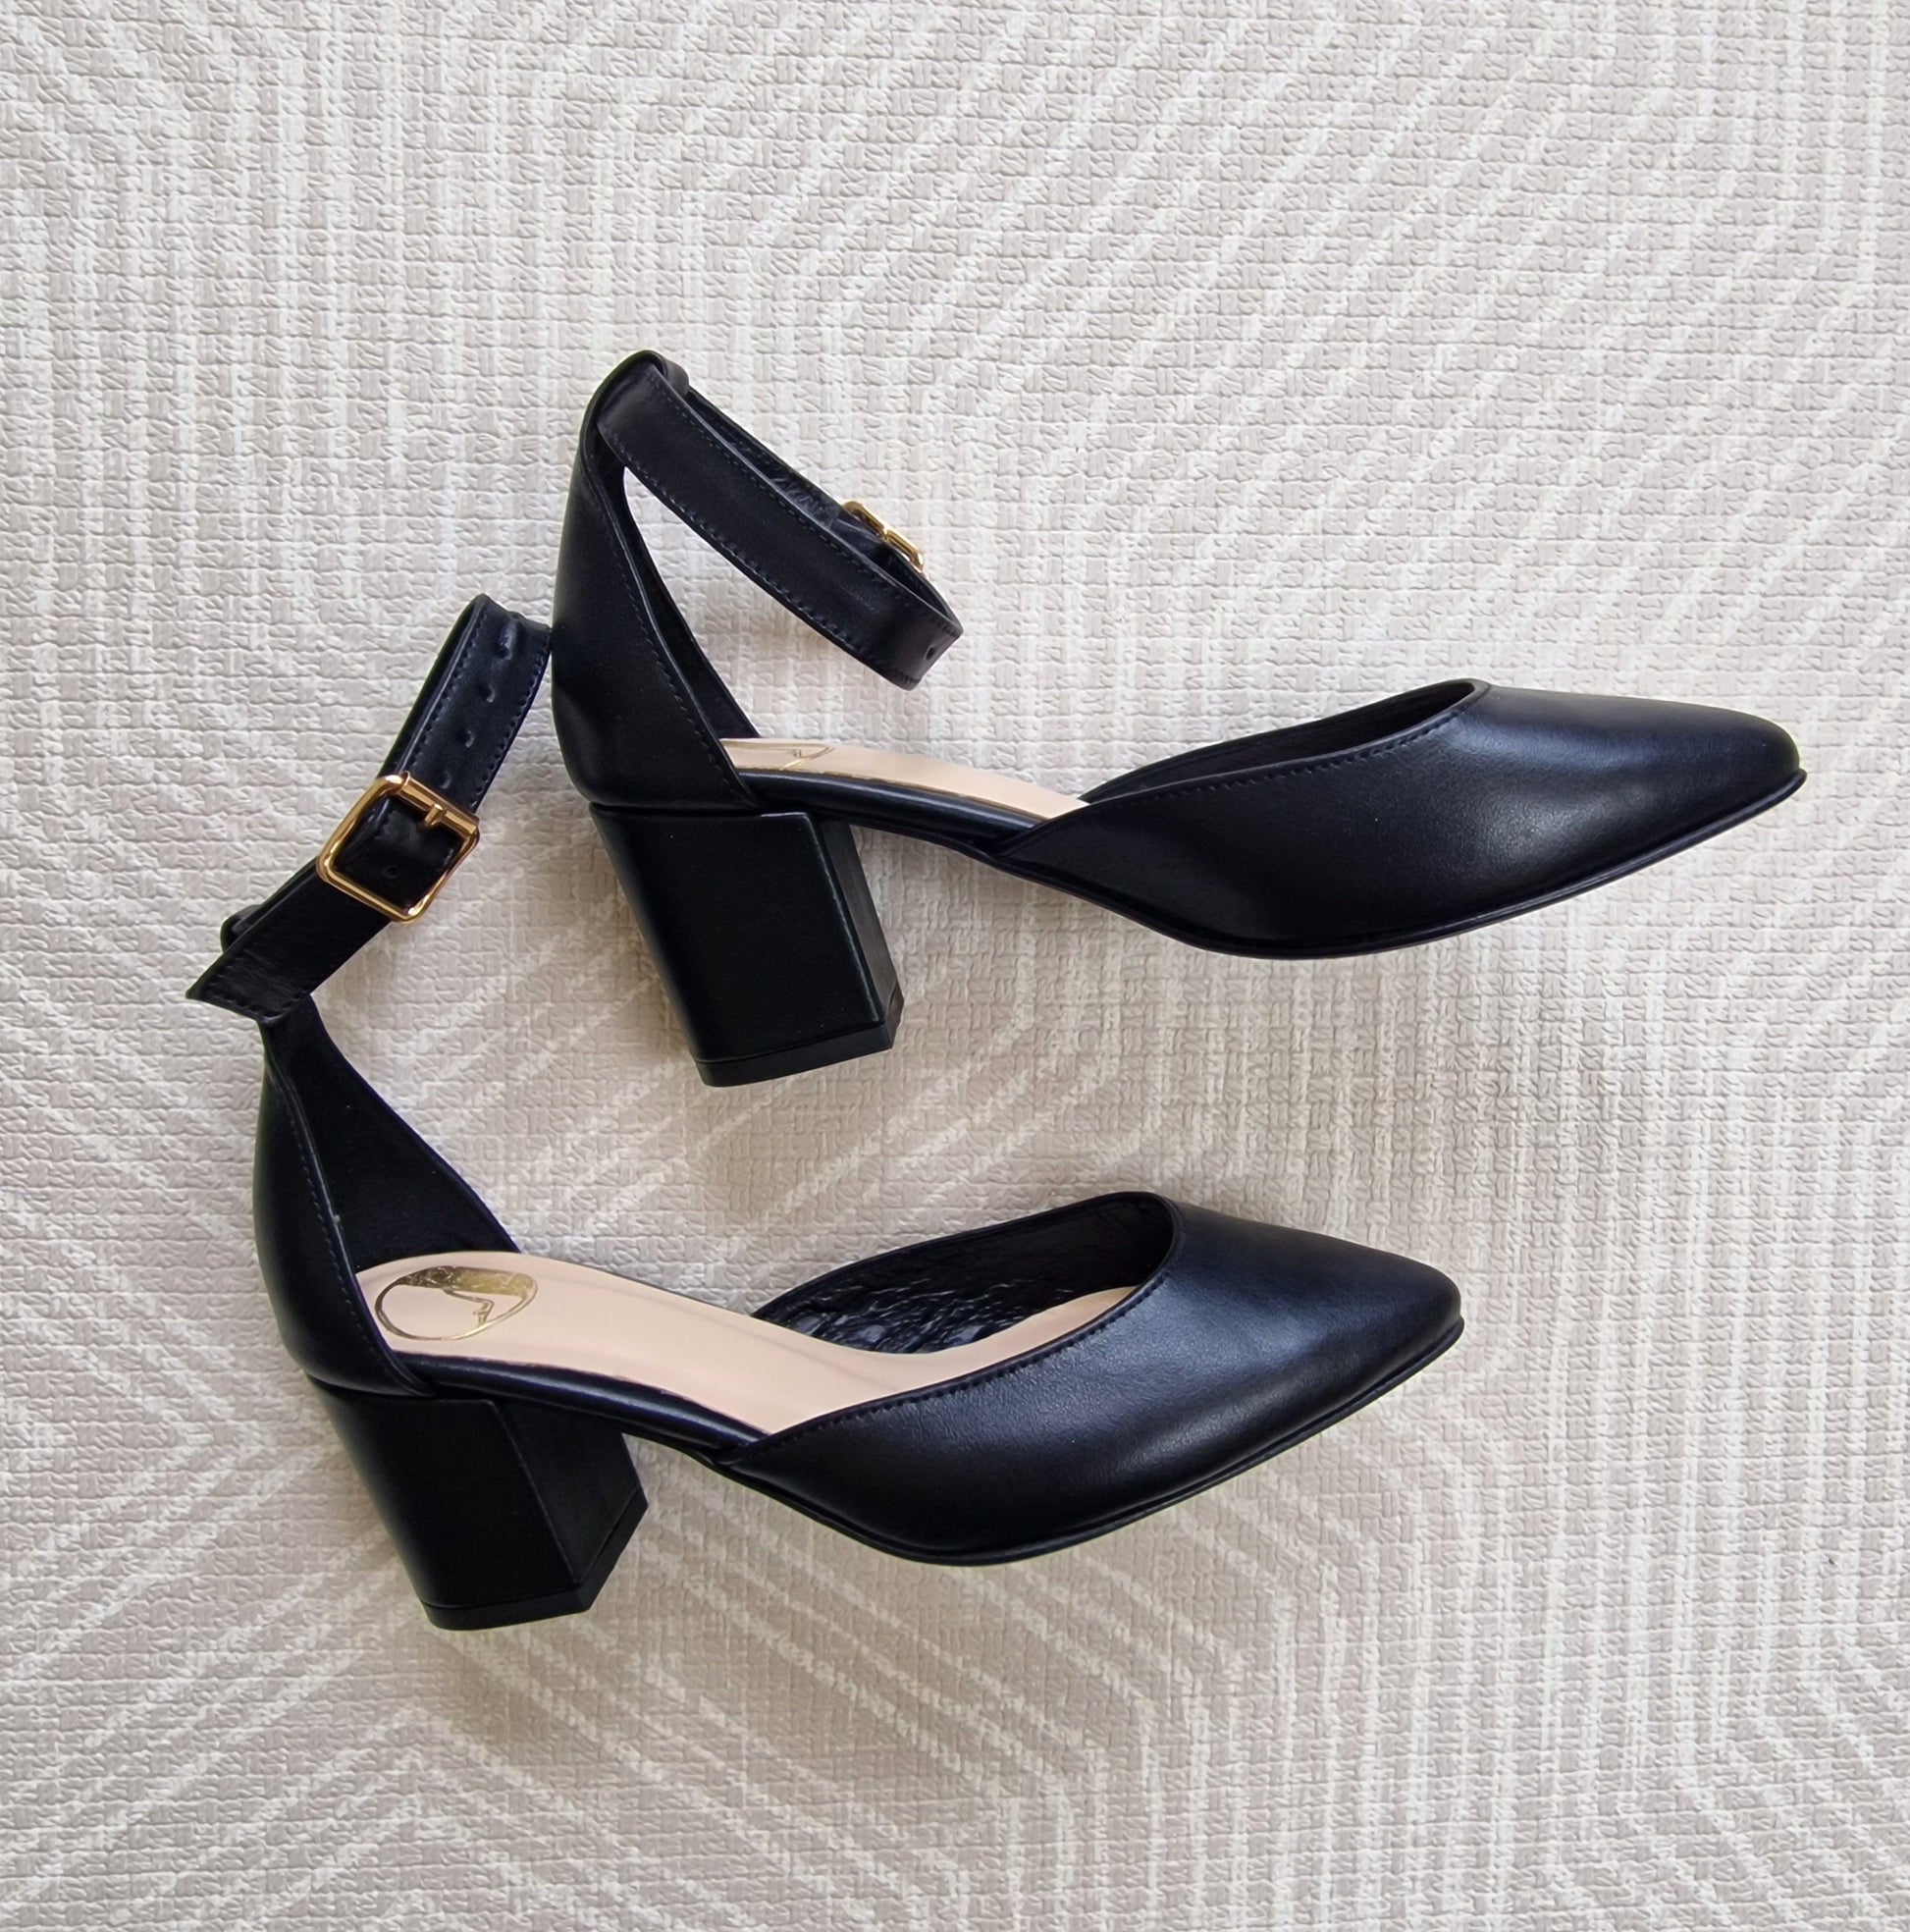 Black leather block heel pointed toe court shoes. 